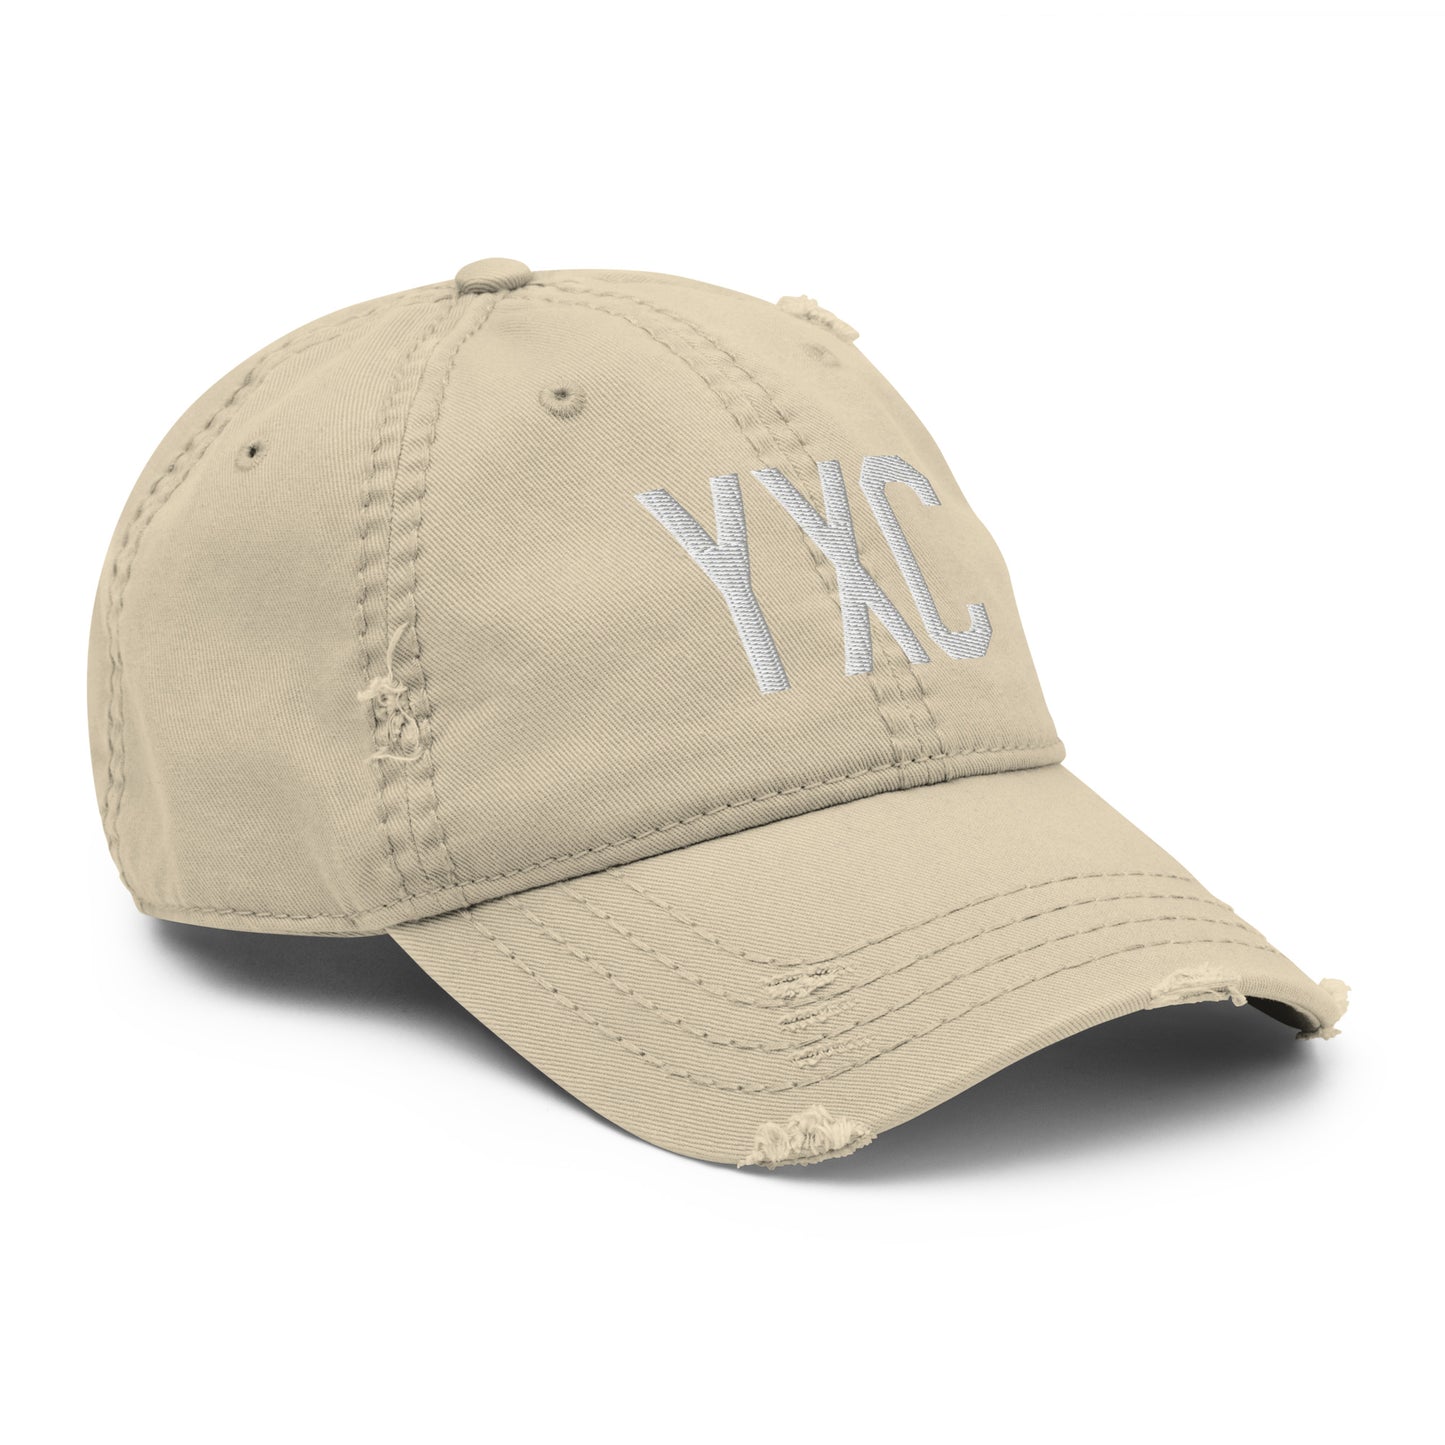 Airport Code Distressed Hat - White • YXC Cranbrook • YHM Designs - Image 20